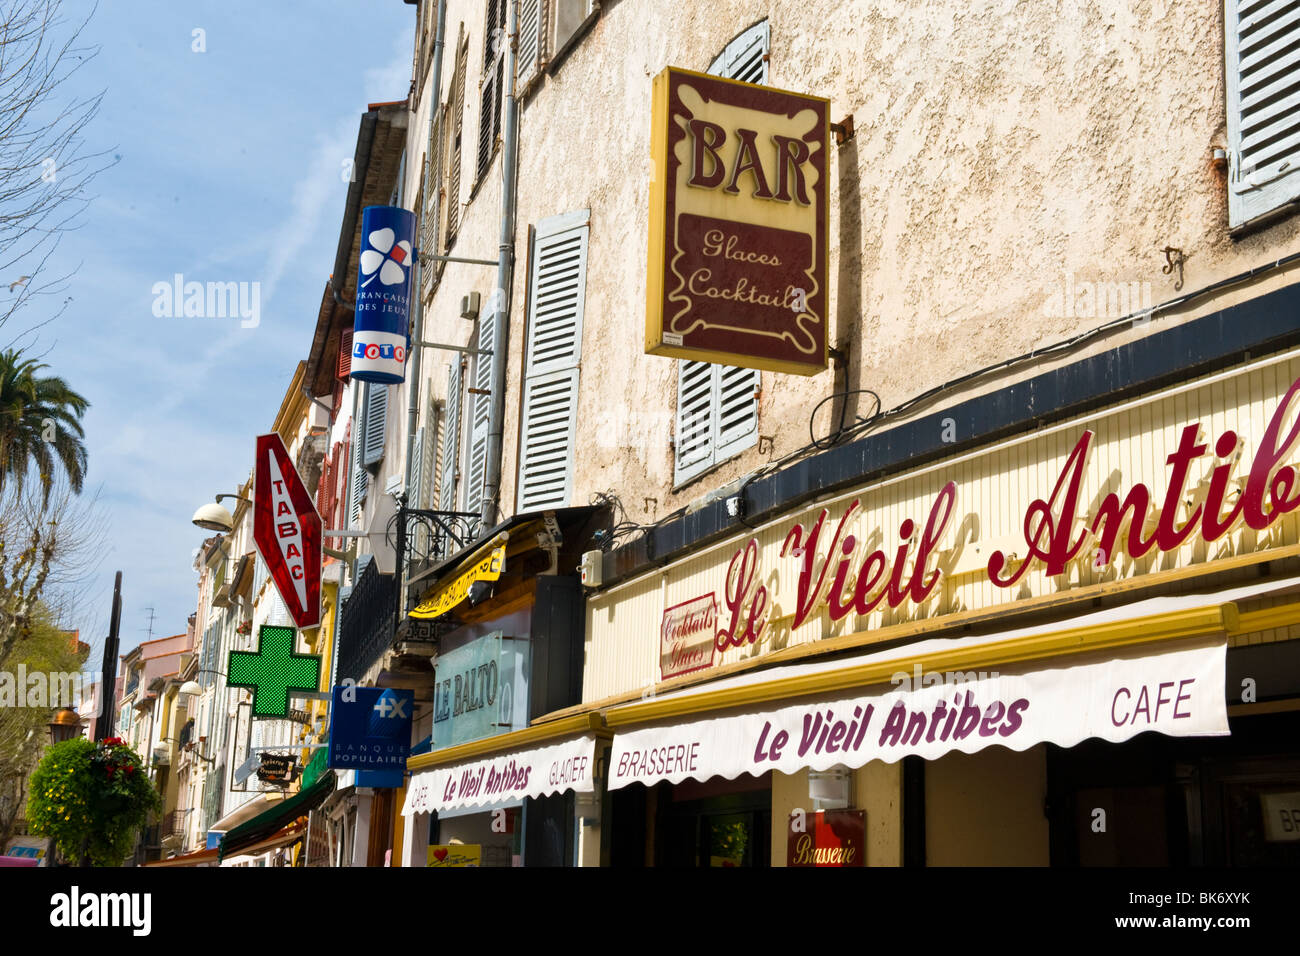 Antibes , typical shop or store arcade with Tabac , loto & pharmacy signs & Le Vieil Antibes brasserie , cafe or restaurant Stock Photo